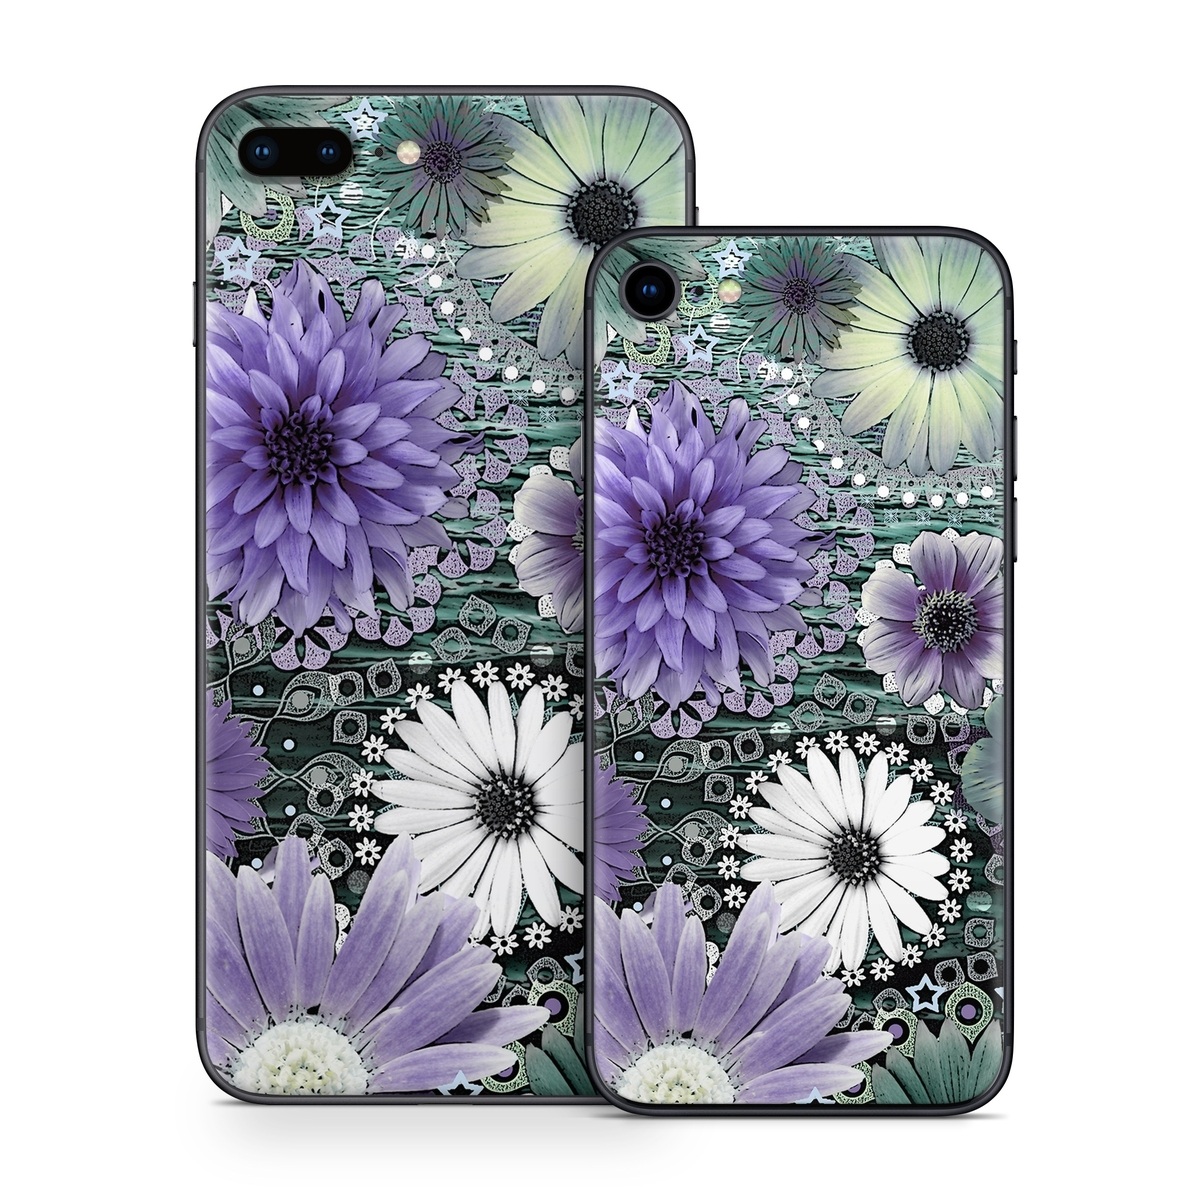 iPhone 8 Series Skin design of Purple, Flower, african daisy, Pericallis, Plant, Violet, Lavender, Botany, Petal, Pattern, with gray, black, blue, purple, white colors